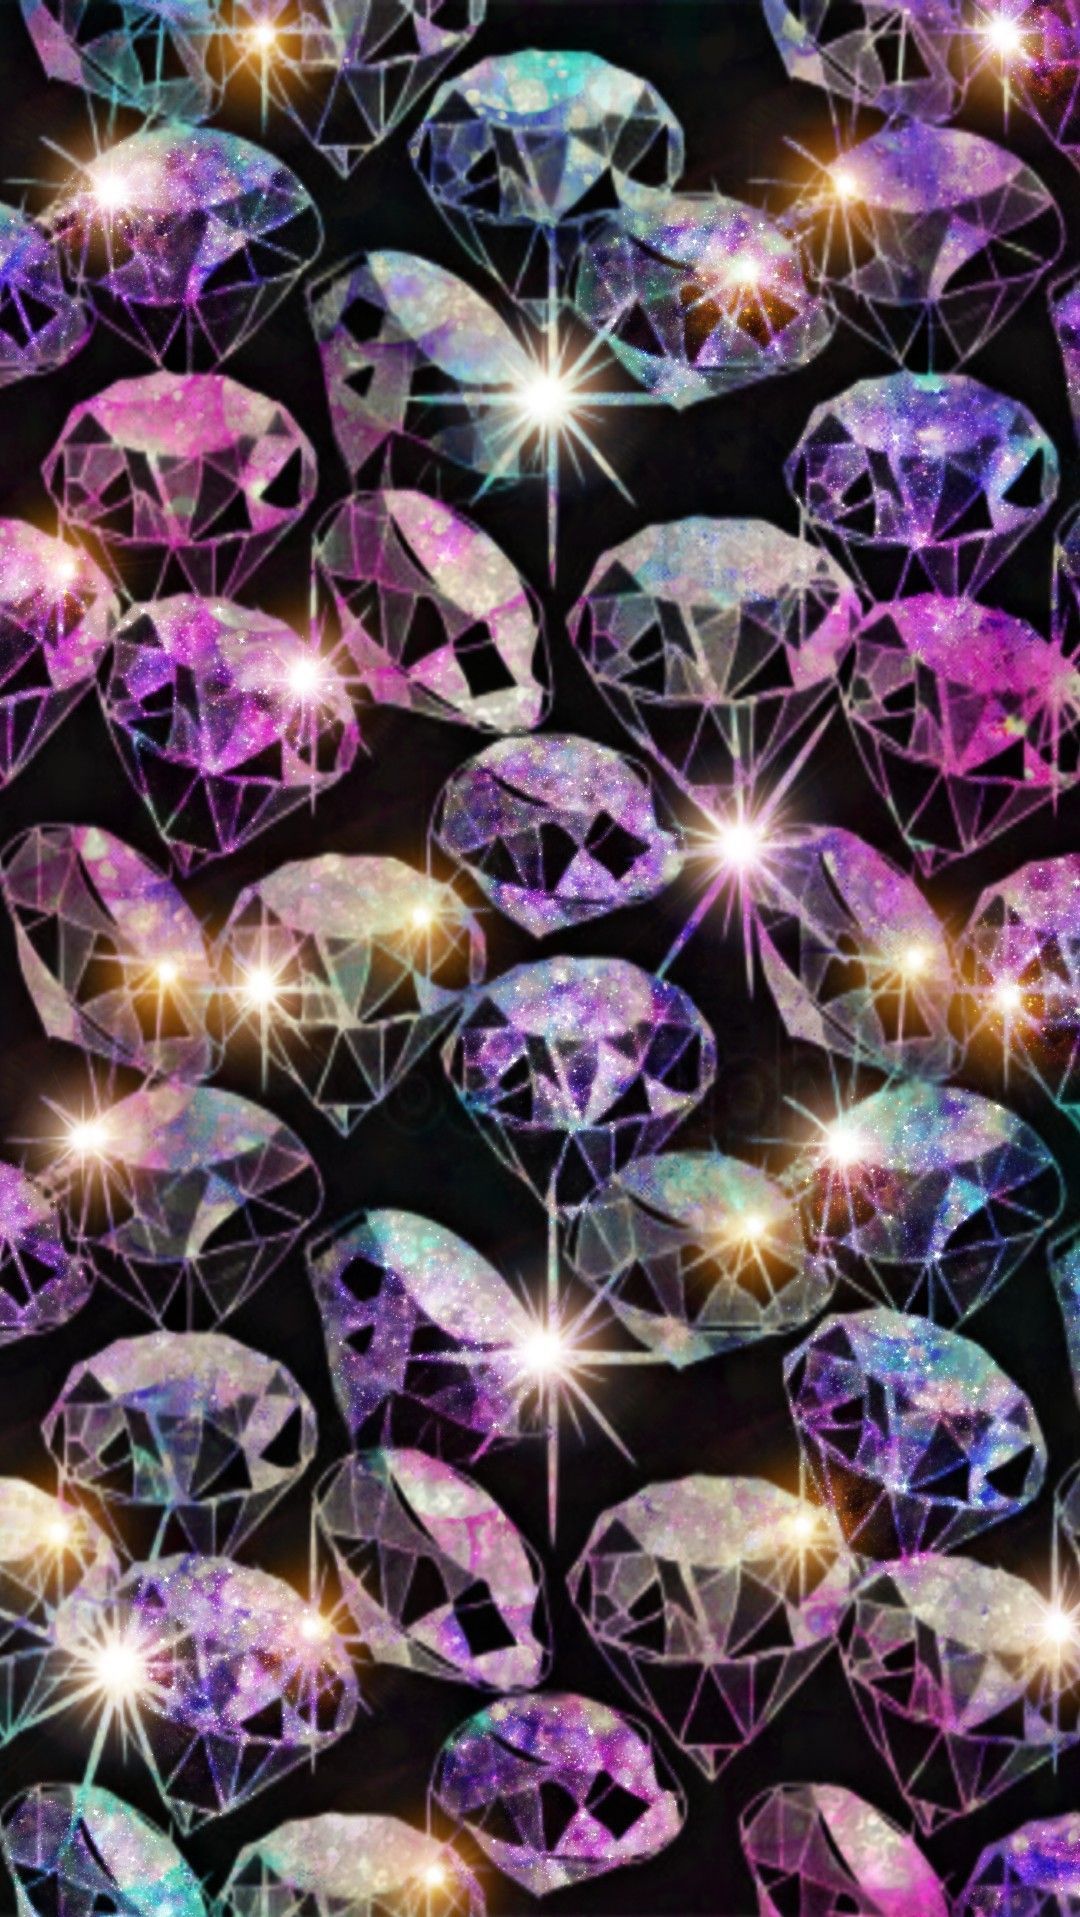 Twinkling Gems Galaxy, made by me #purple #sparkly #wallpaper #background #sparkles #glittery. Diamond wallpaper, Pretty phone wallpaper, Wallpaper background